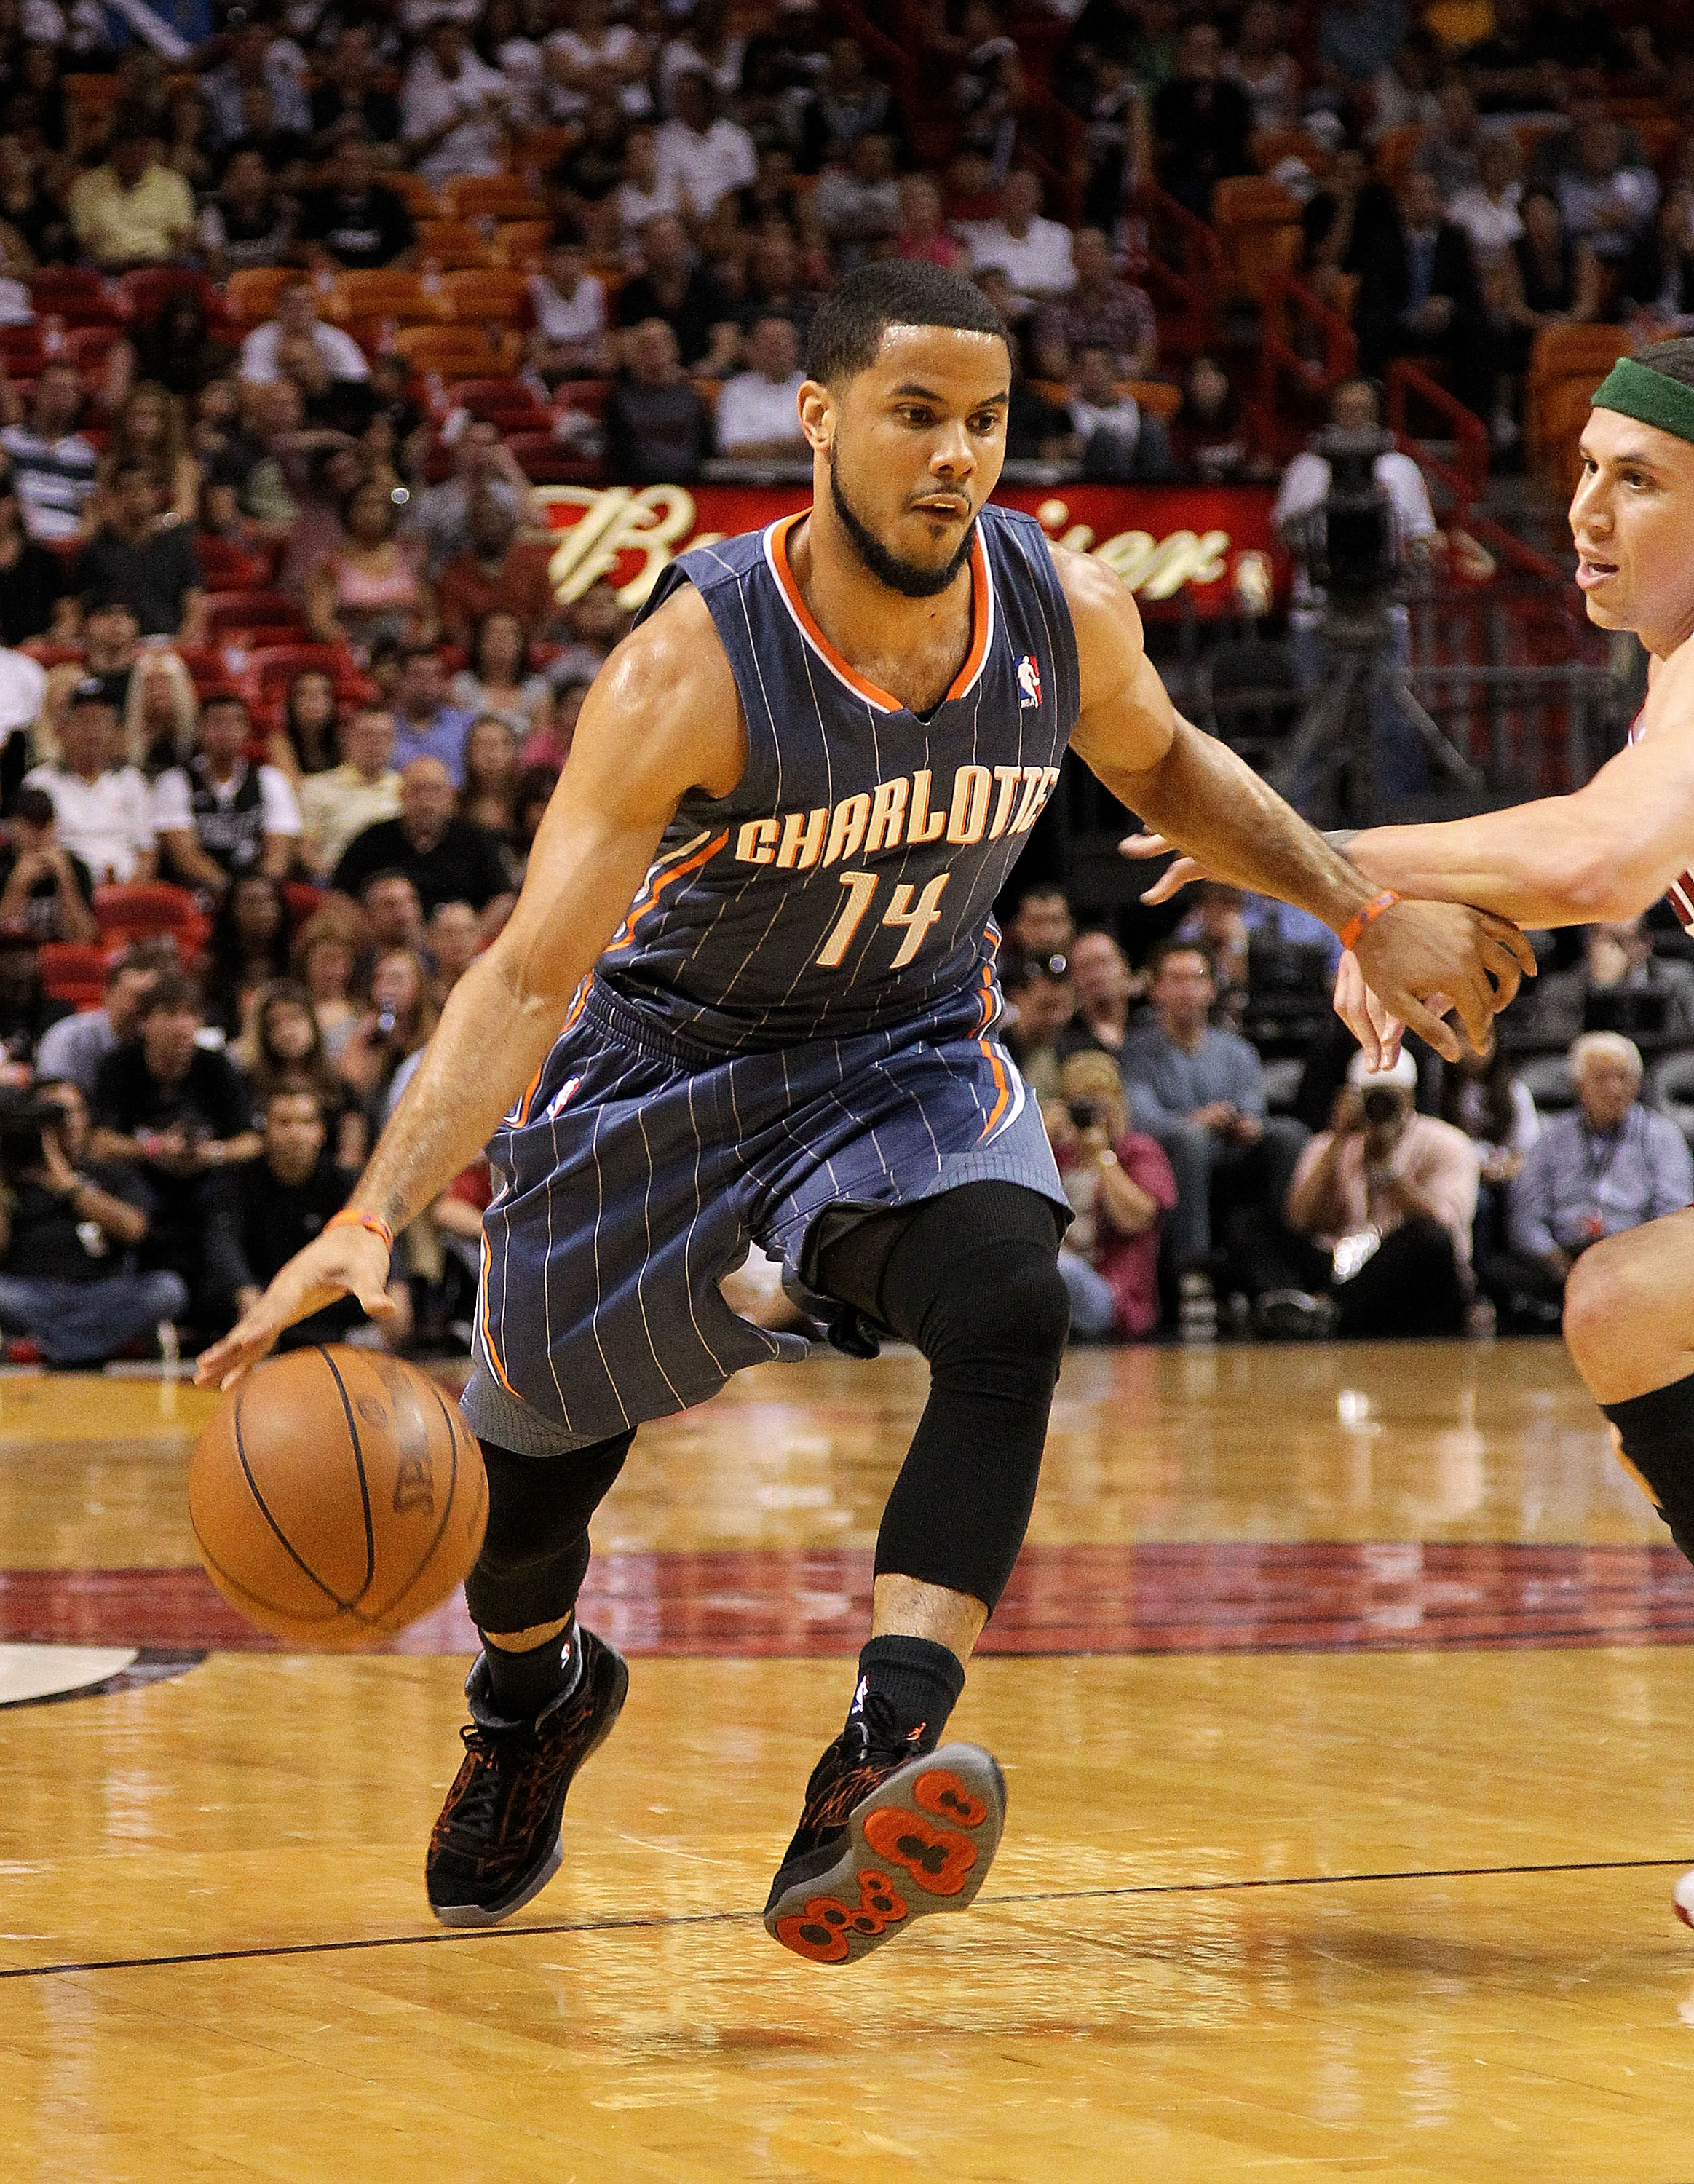 MIAMI, FL - APRIL 08:  D.J. Augustin #14 of the Charlotte Bobcats drives to the lane during a game against the Miami Heat at American Airlines Arena on April 8, 2011 in Miami, Florida. NOTE TO USER: User expressly acknowledges and agrees that, by download